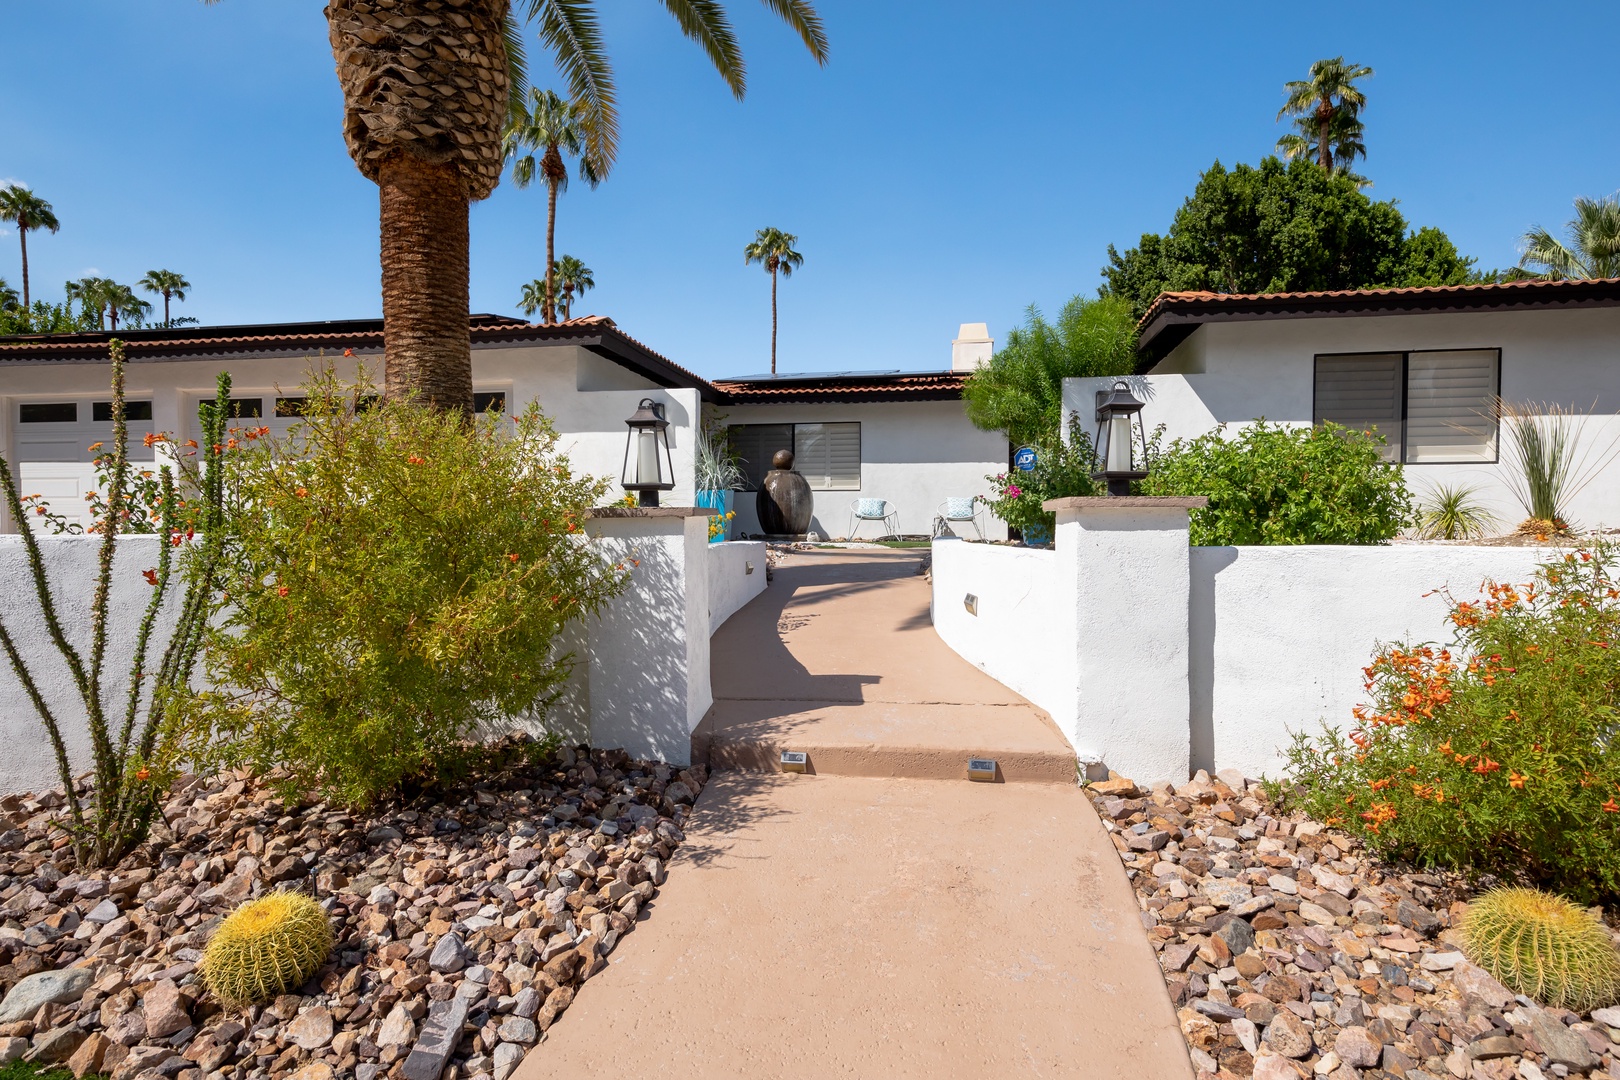 Welcome to your next Palm Springs vacation!